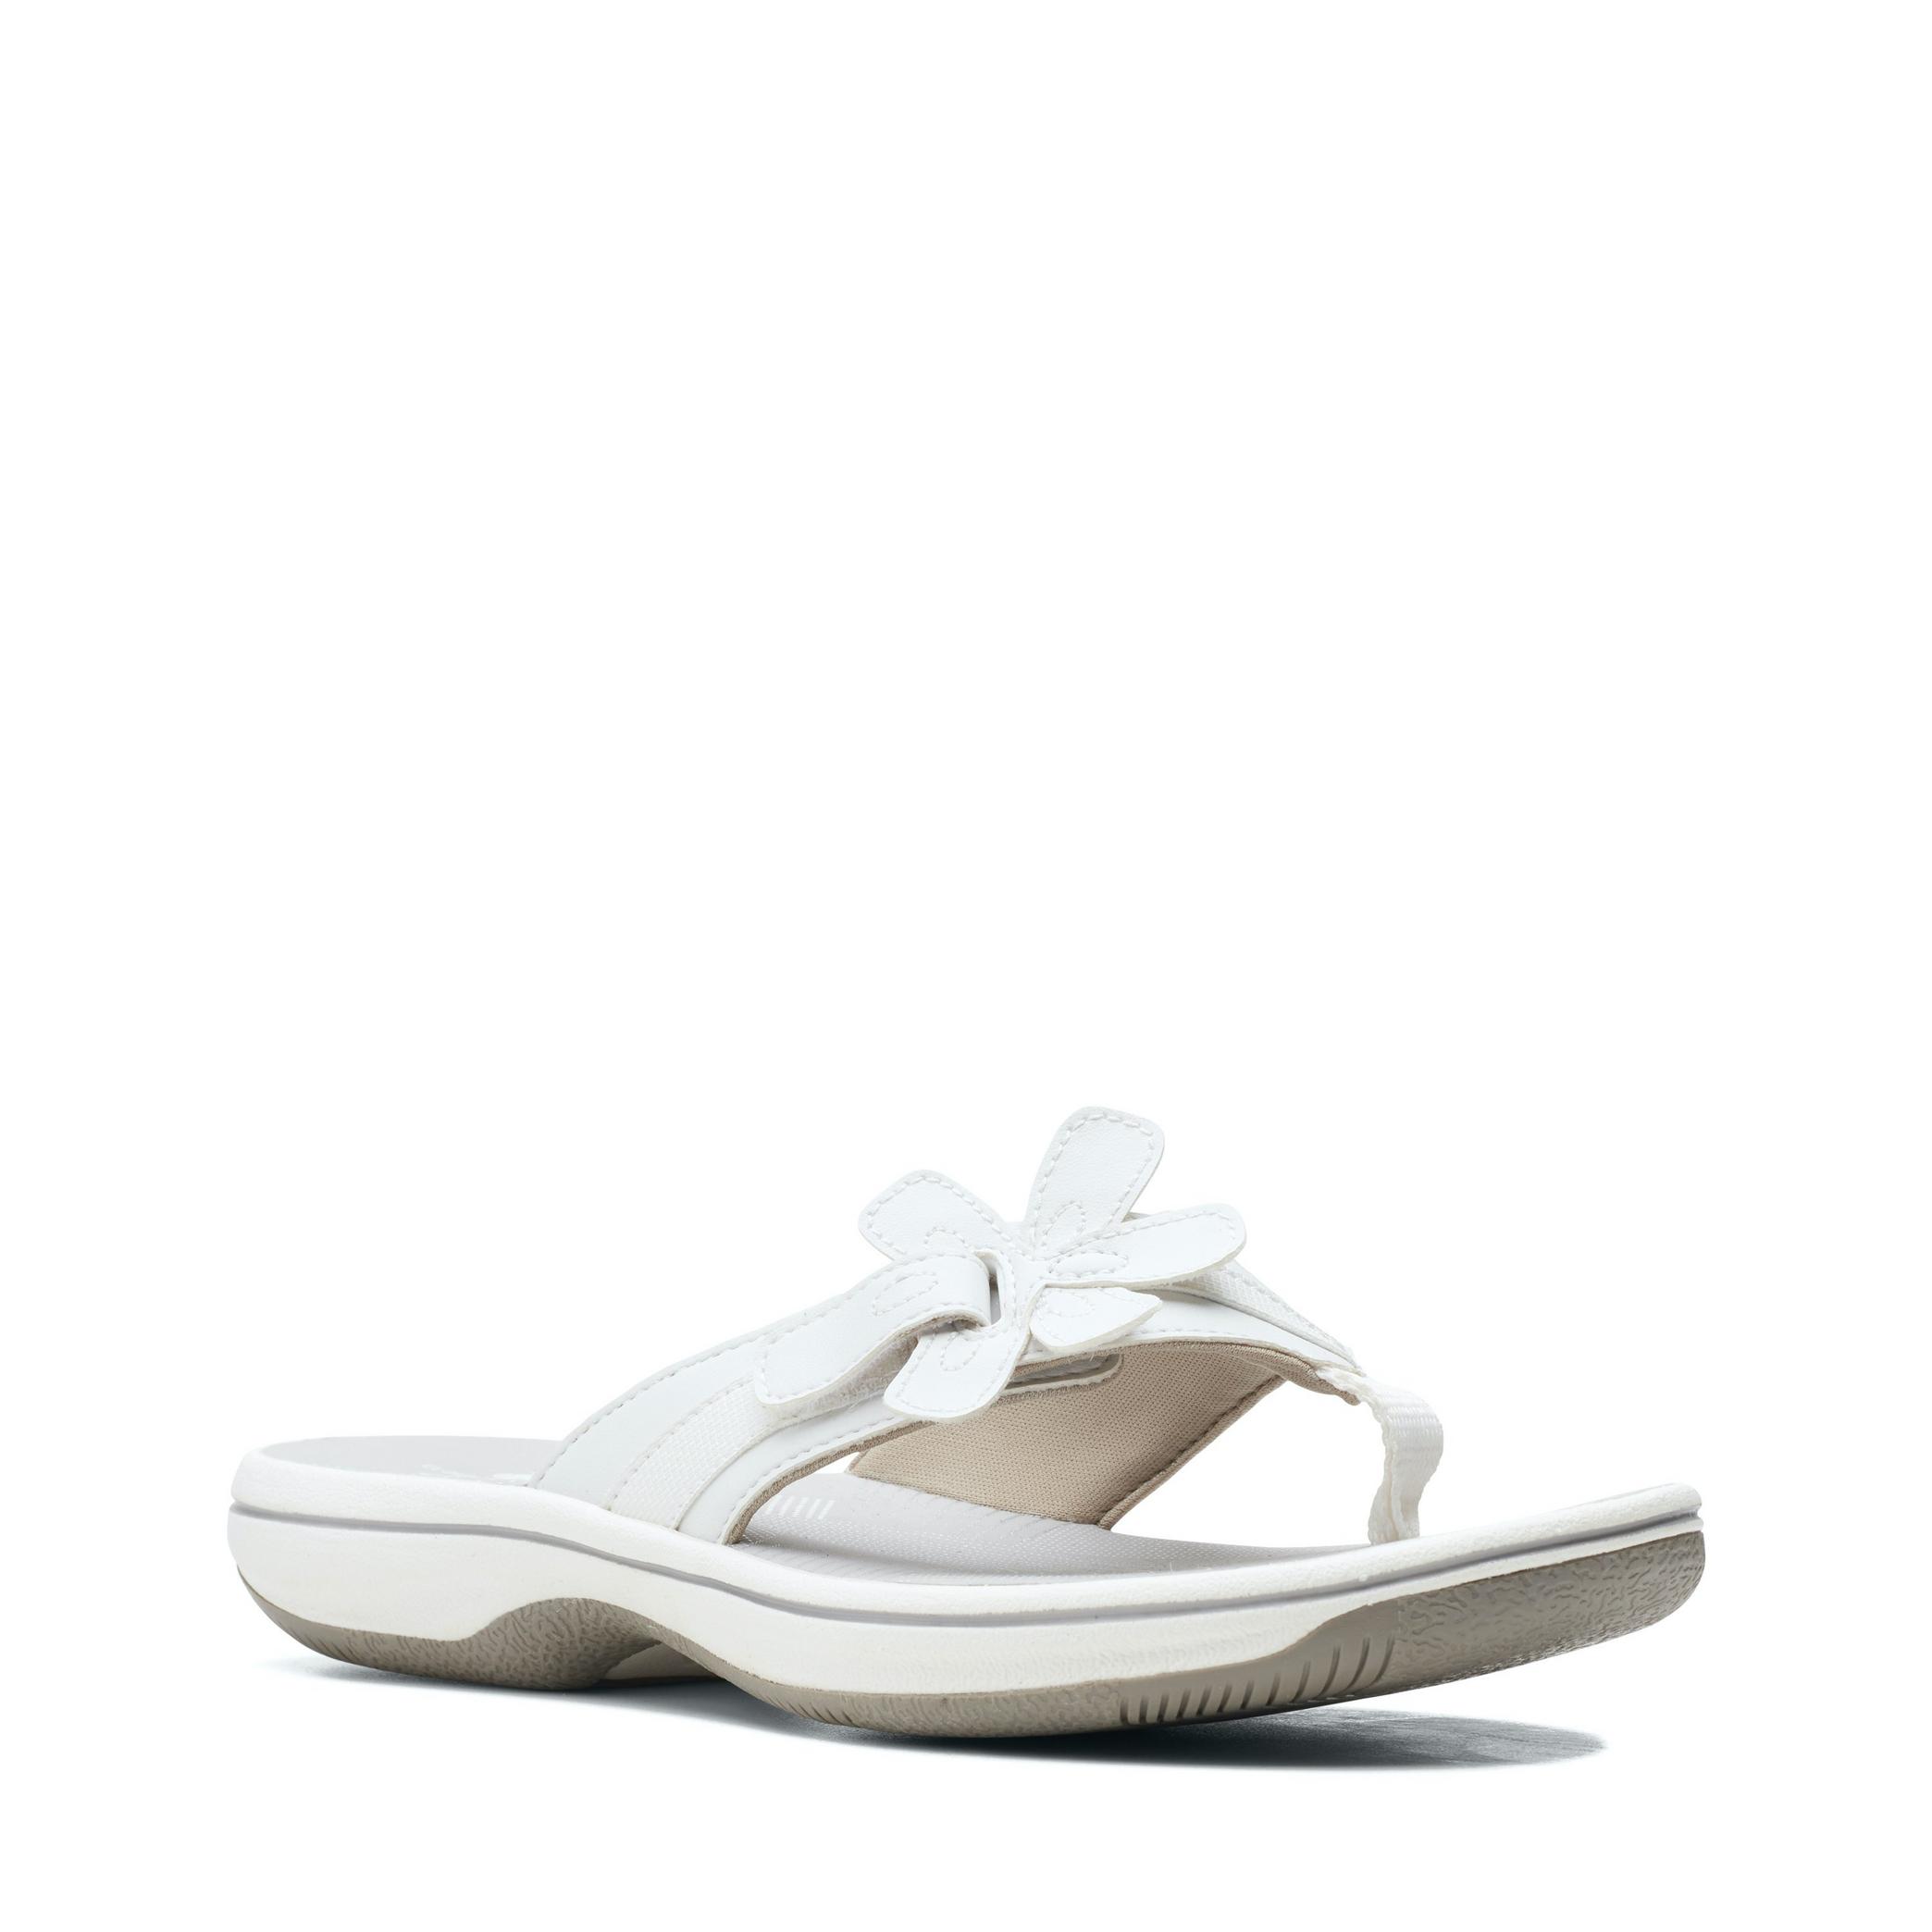 Brinkley Flora White Flat Sandals, view 2 of 7